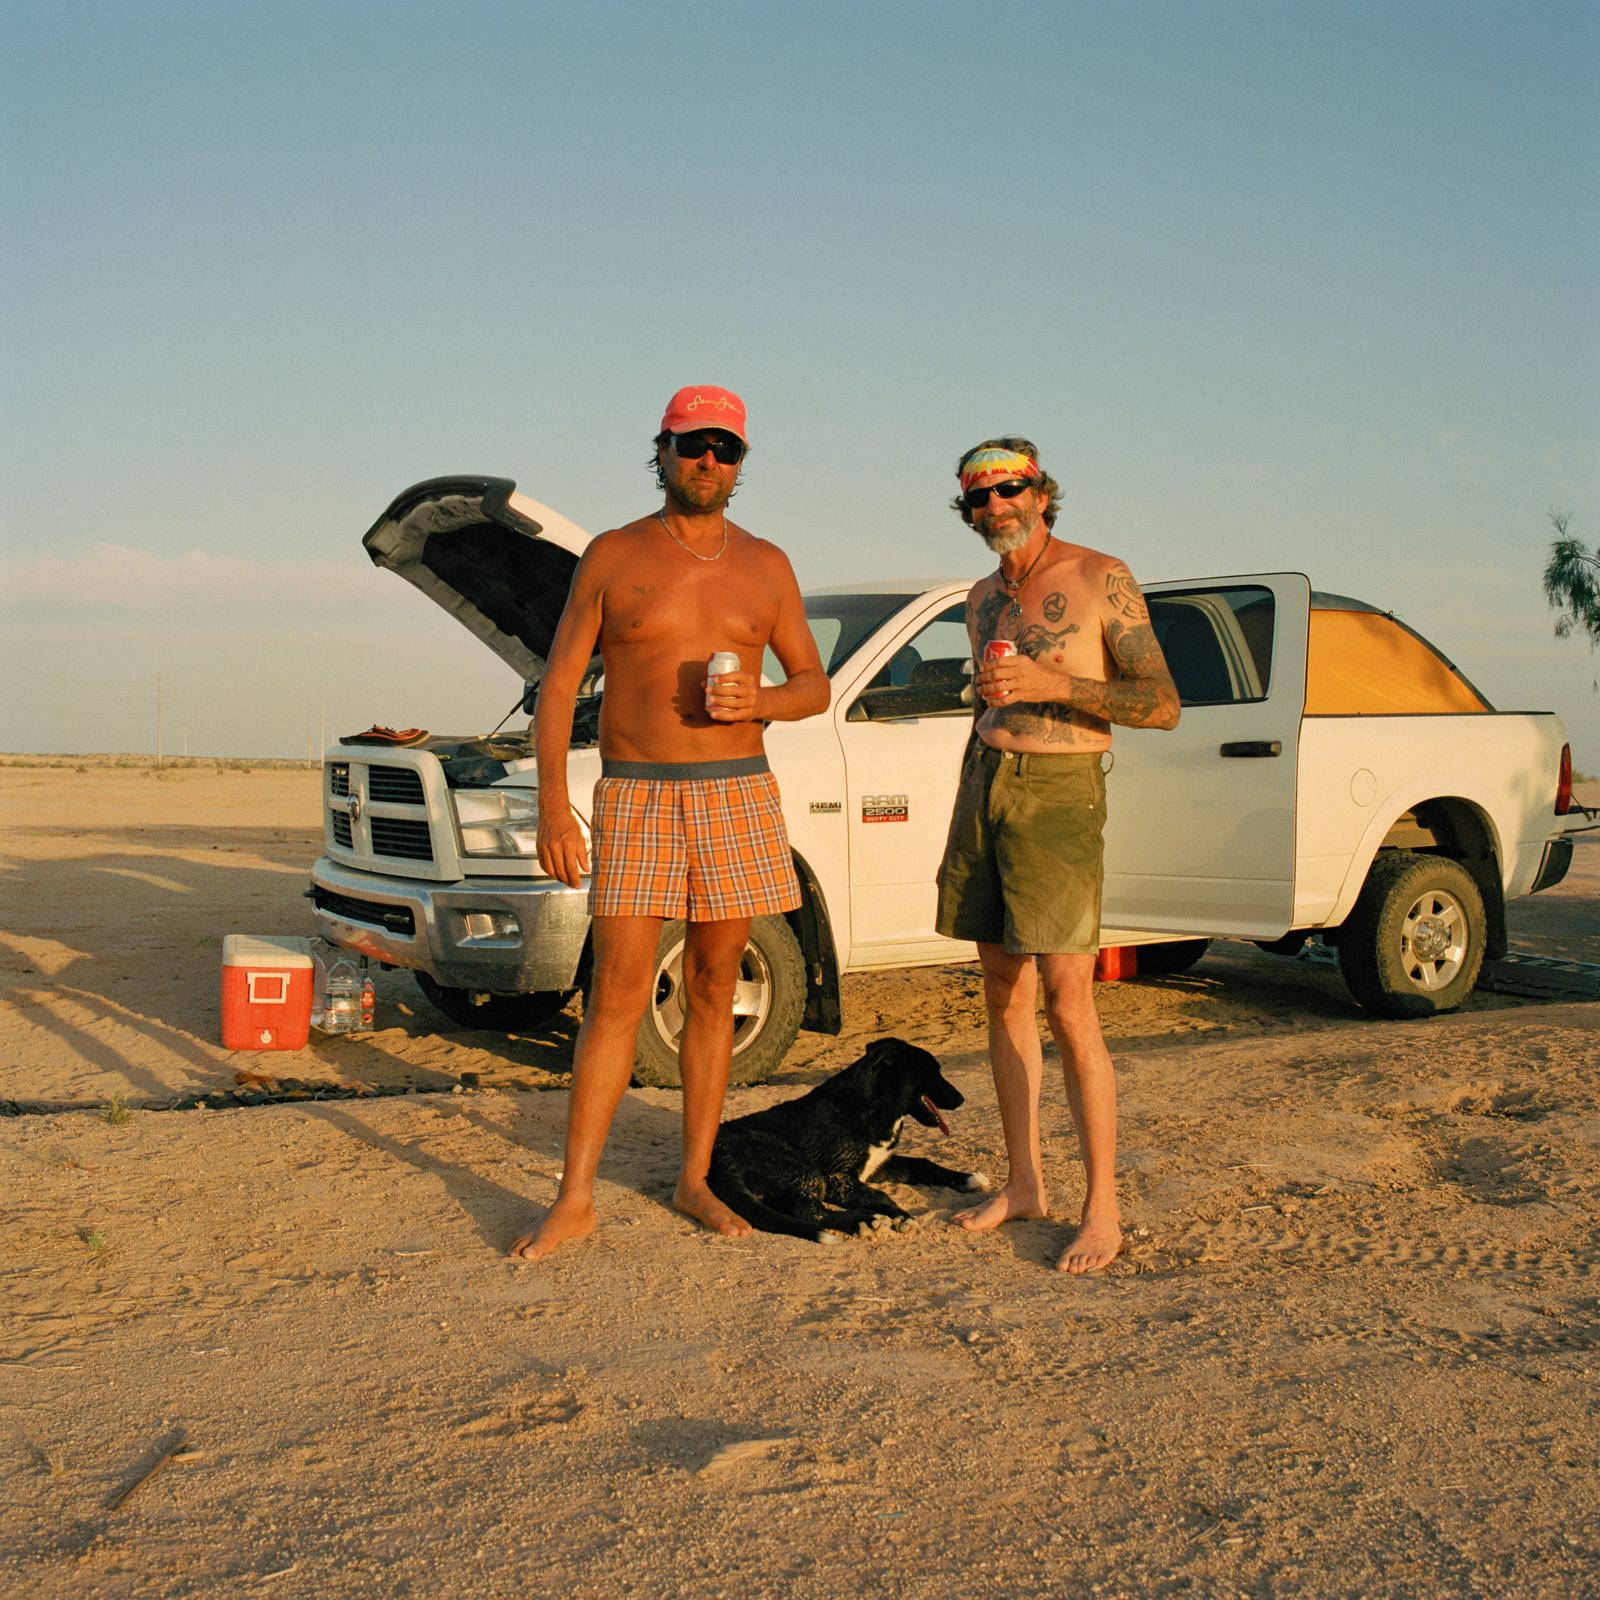 © Louise Amelie - "Men With Dog" Company for a night, Colorado Desert.